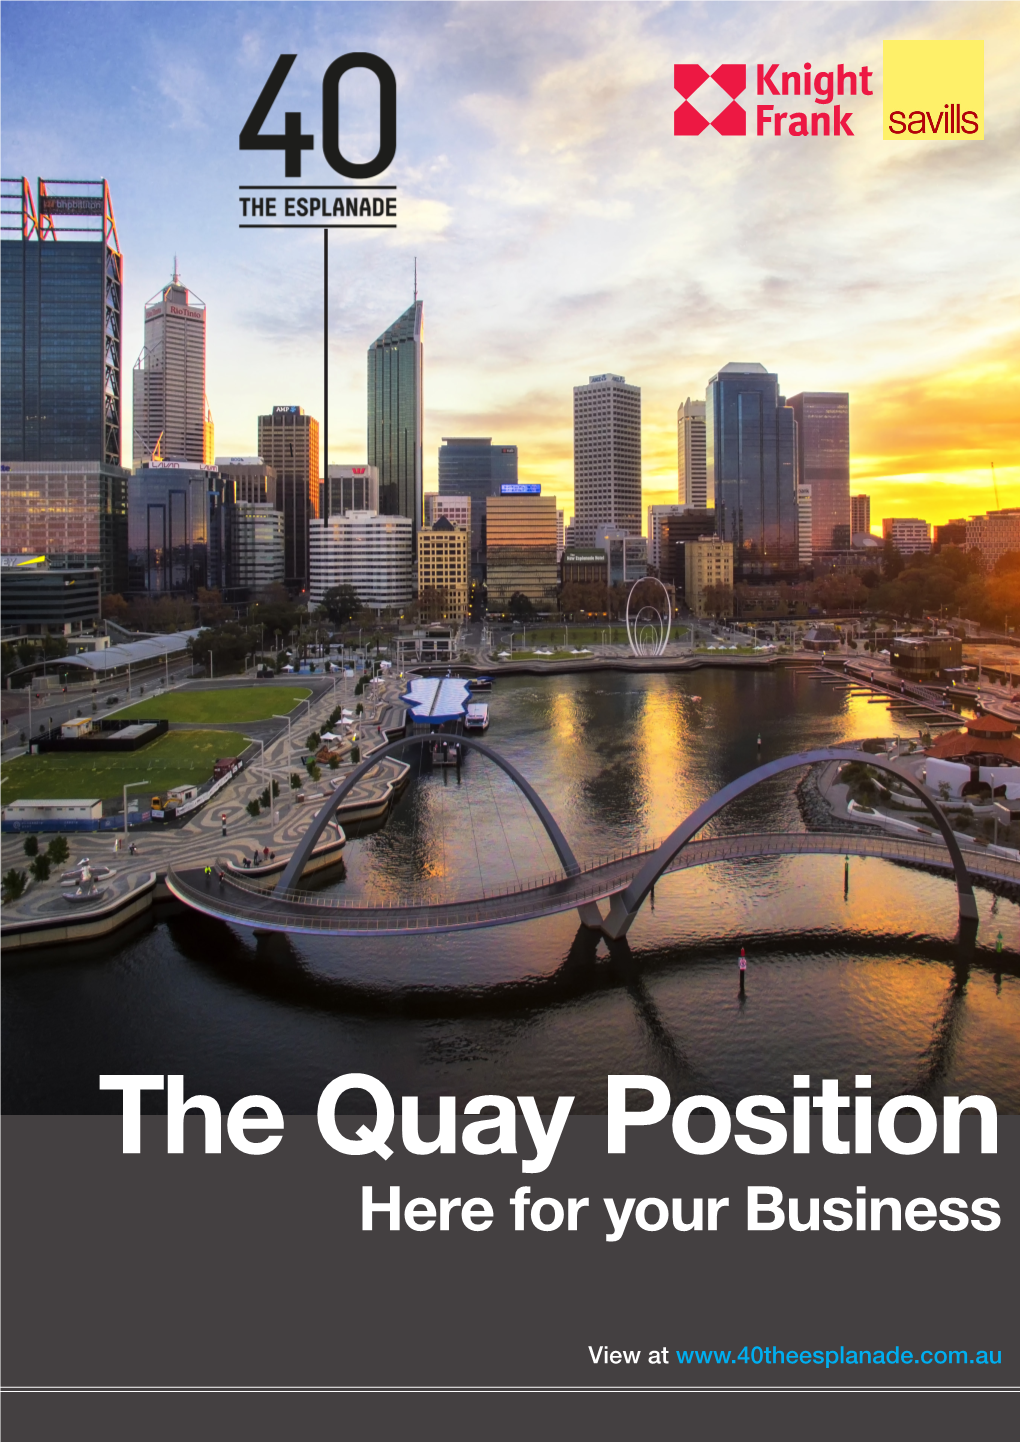 The Quay Position Here for Your Business